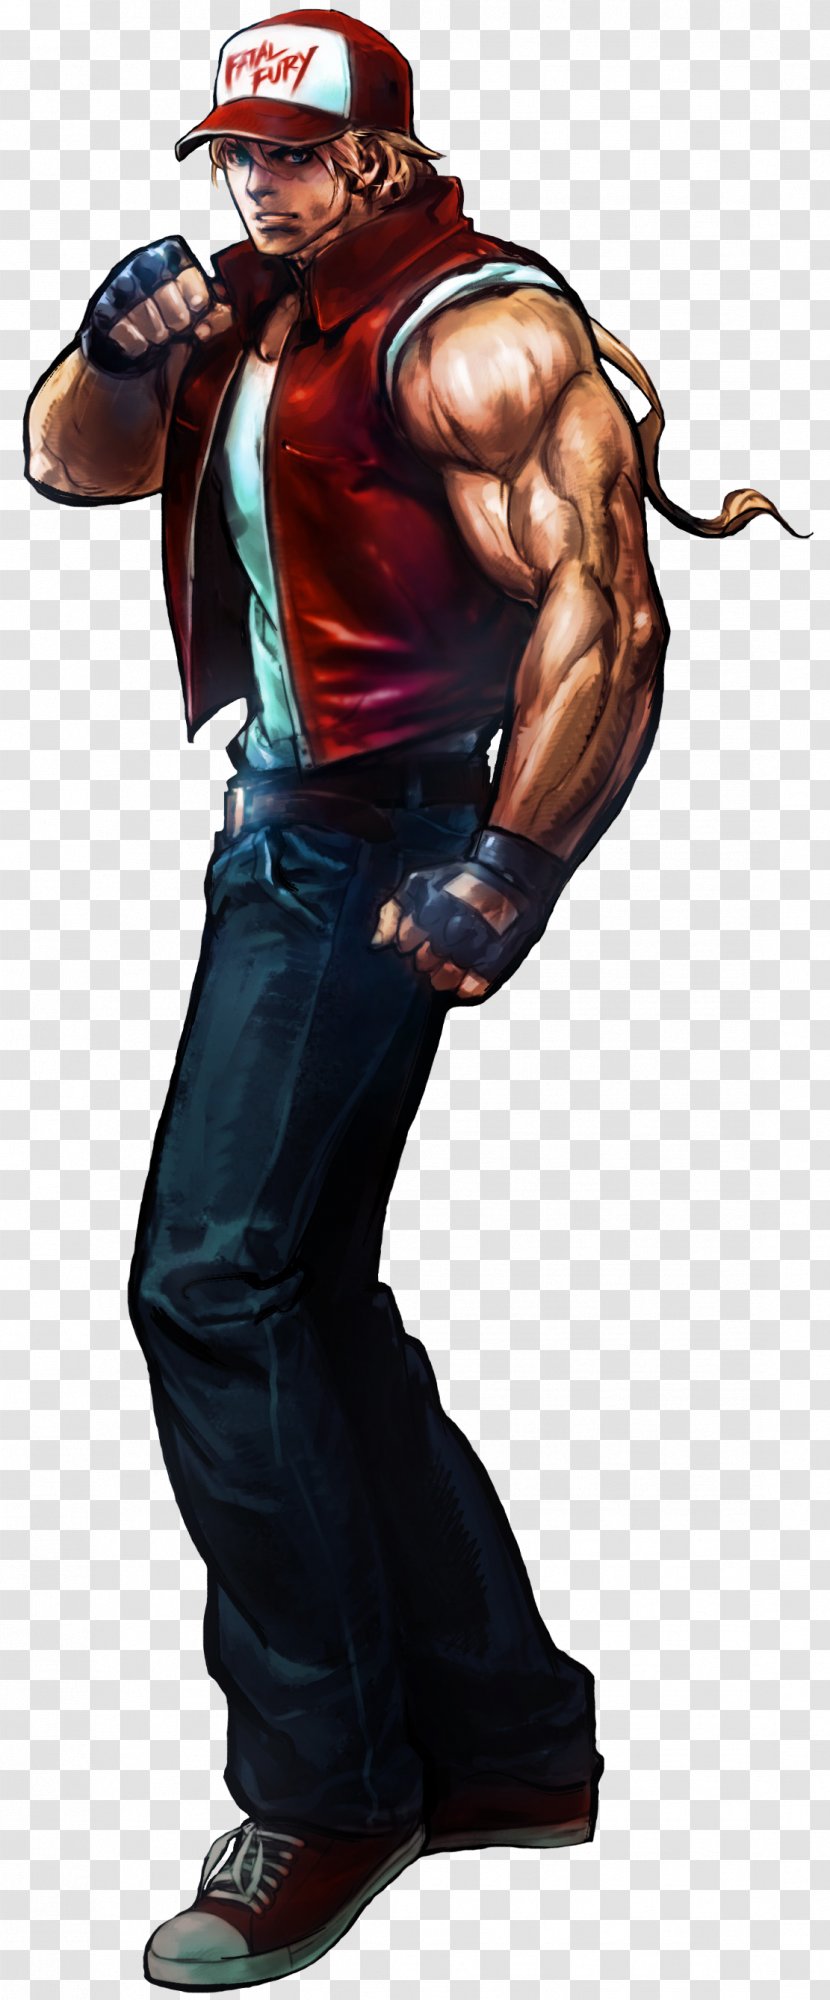 The King Of Fighters XIII Terry Bogard Capcom Vs. SNK: Millennium Fight 2000 Andy 2002 Transparent PNG